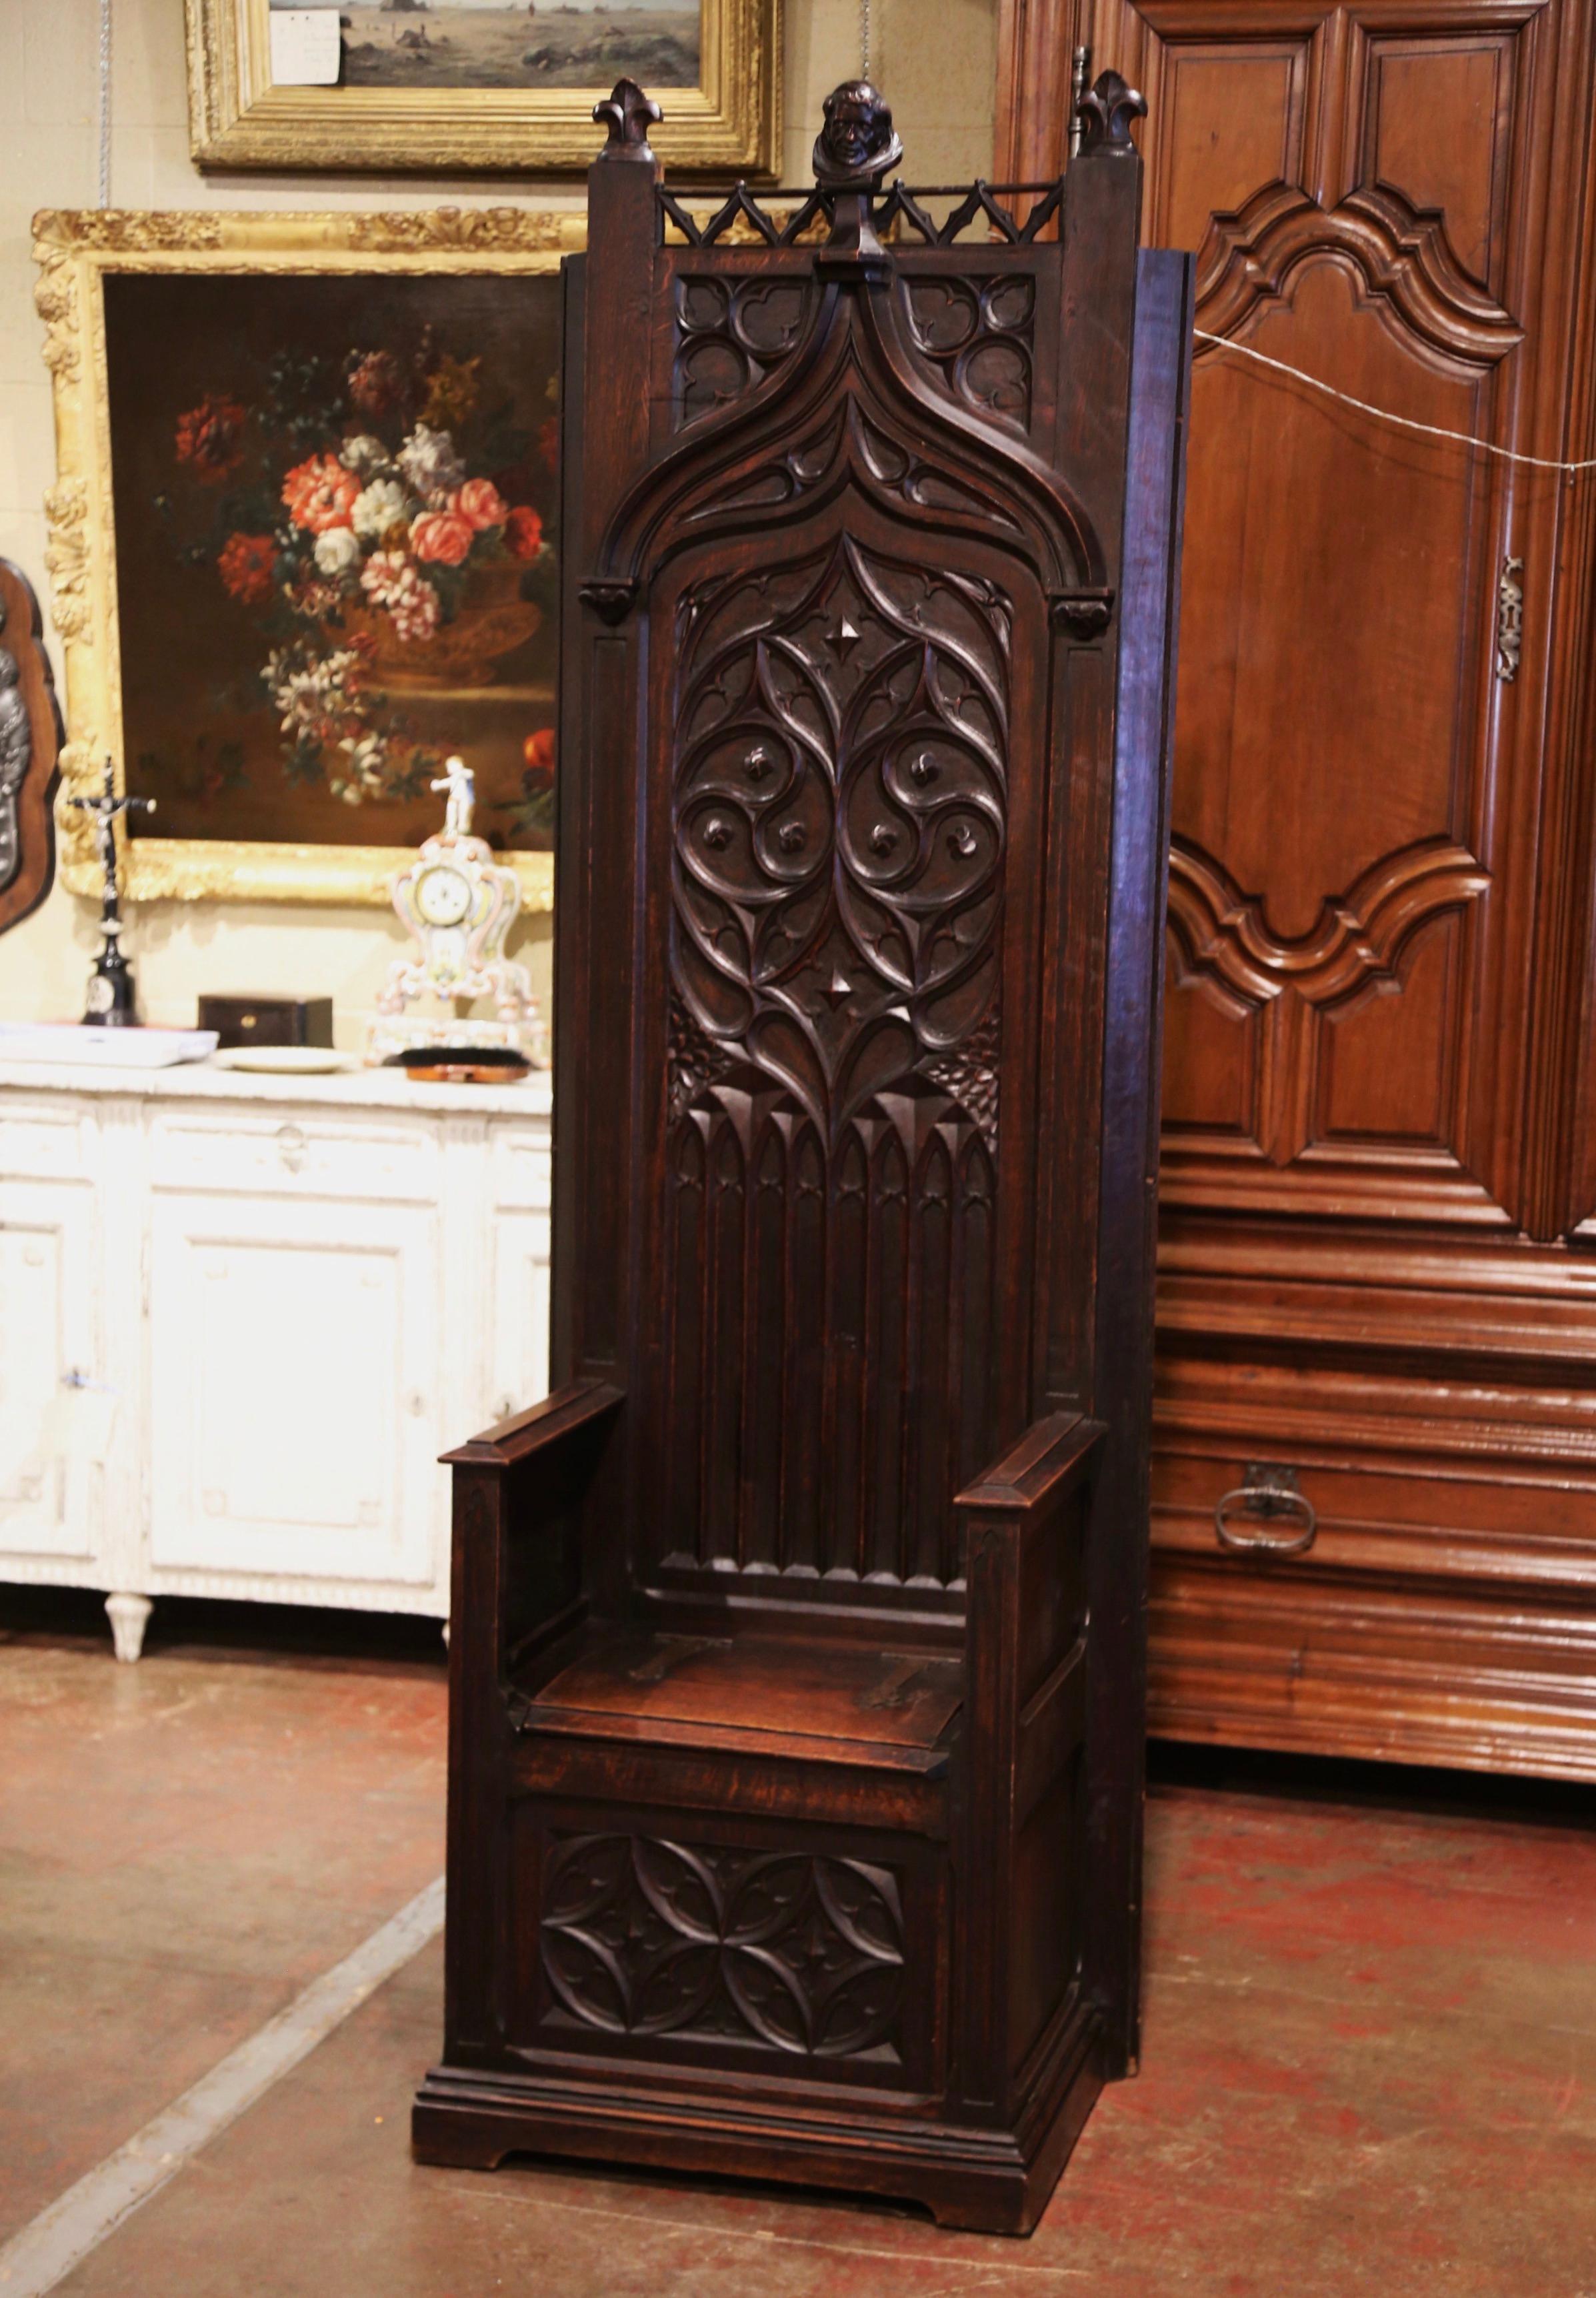 This Gothic “Cathedre” (French for Cathedra or bishop’s throne) was crafted in southern France circa 1880. Built of oak, the chair stands on bracket feet over a straight plinth. The tall back is hand carved with pointed arch and tracery decor